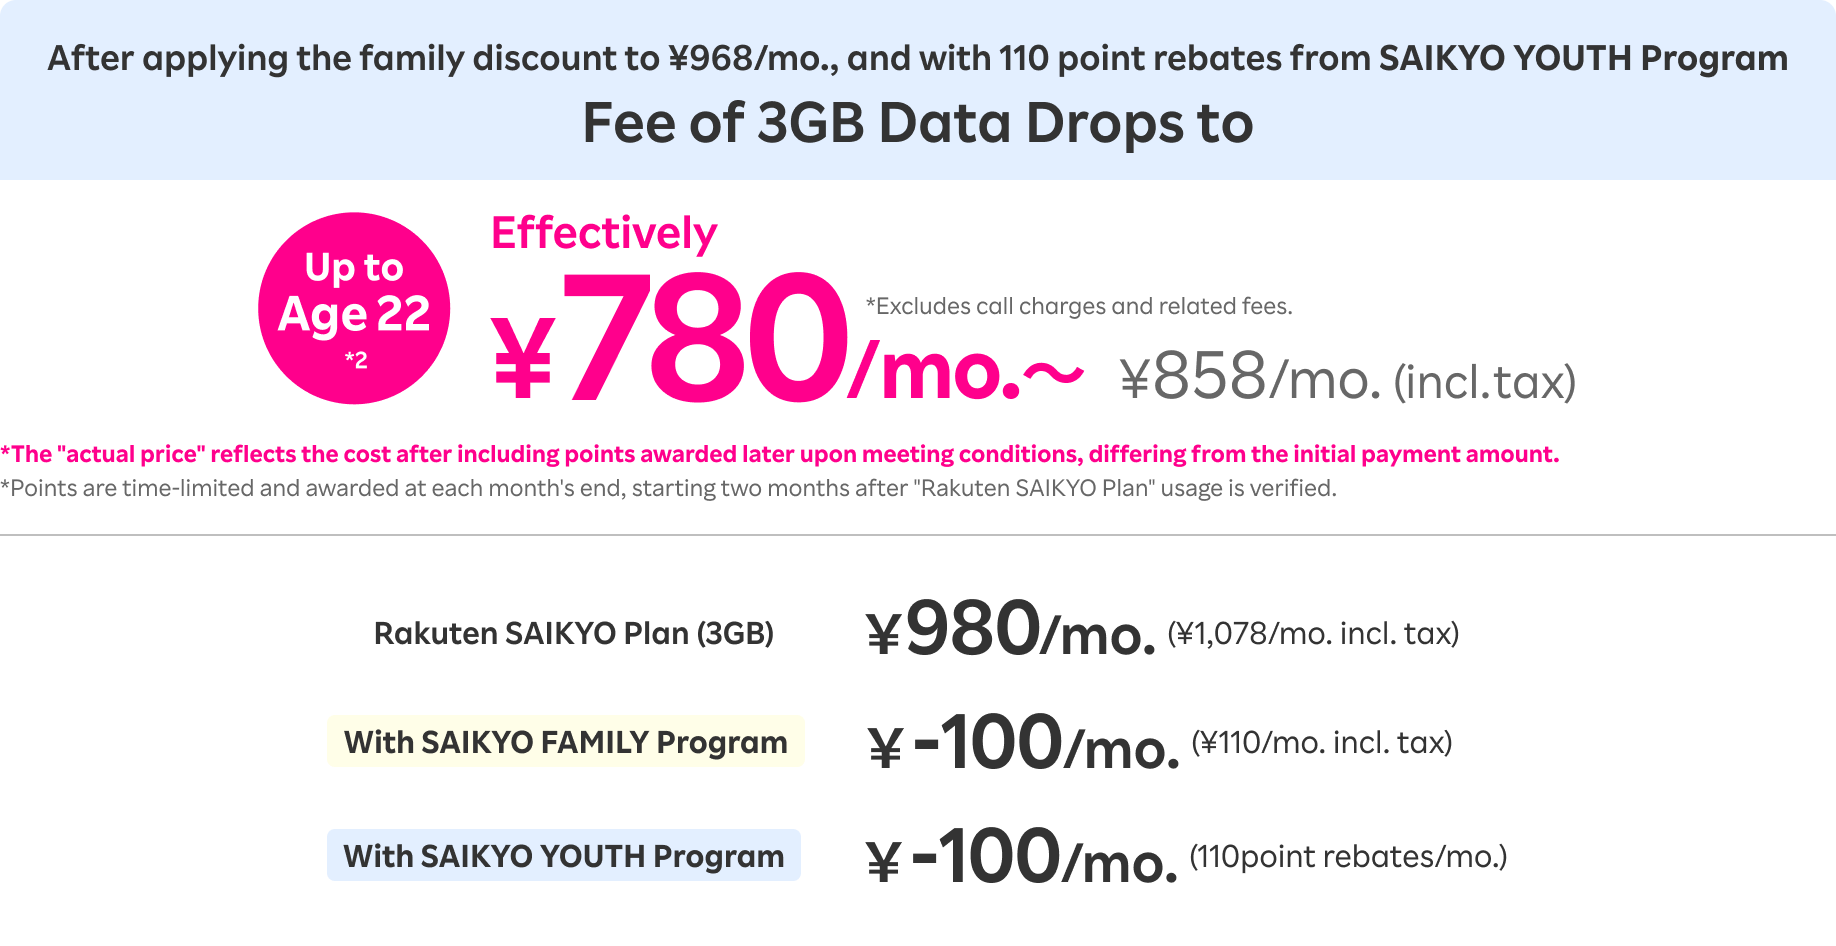 After applying the family discount to ¥968/mo. and with 110 point rebates from SAIKYO YOUTH Program, Fee of 3GB Data Drops to Effectively ¥780/mo.～